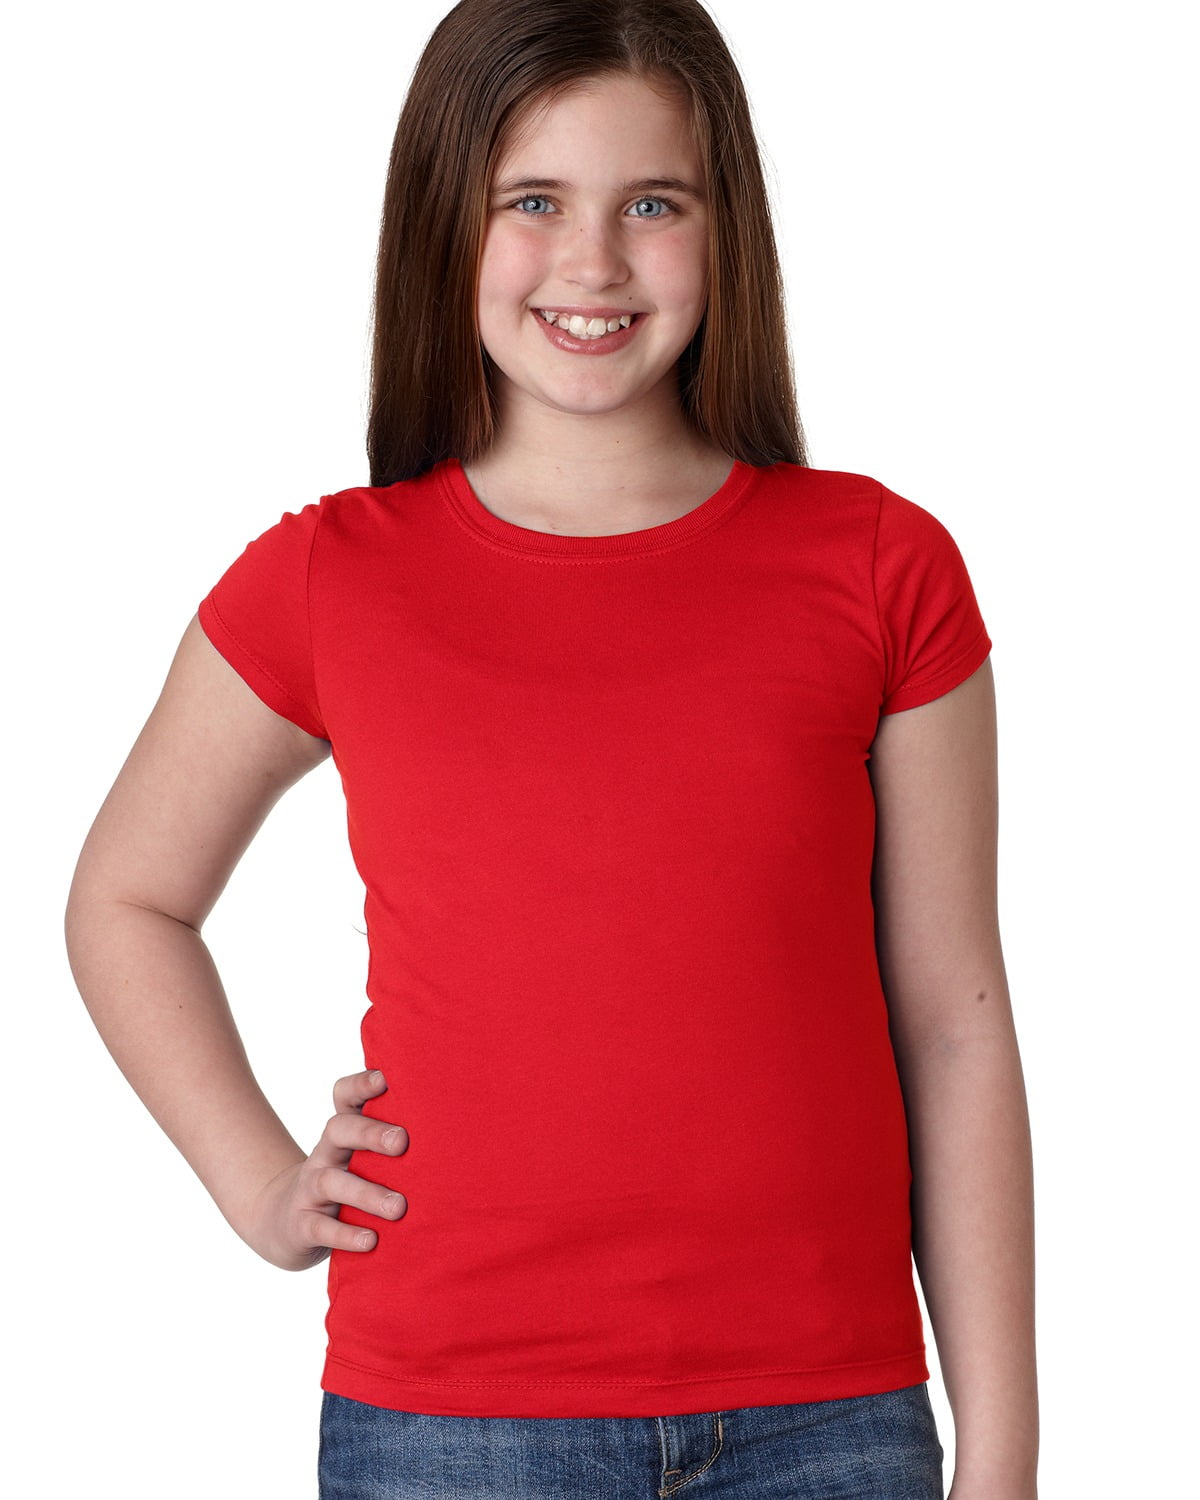 red tshirt for girls